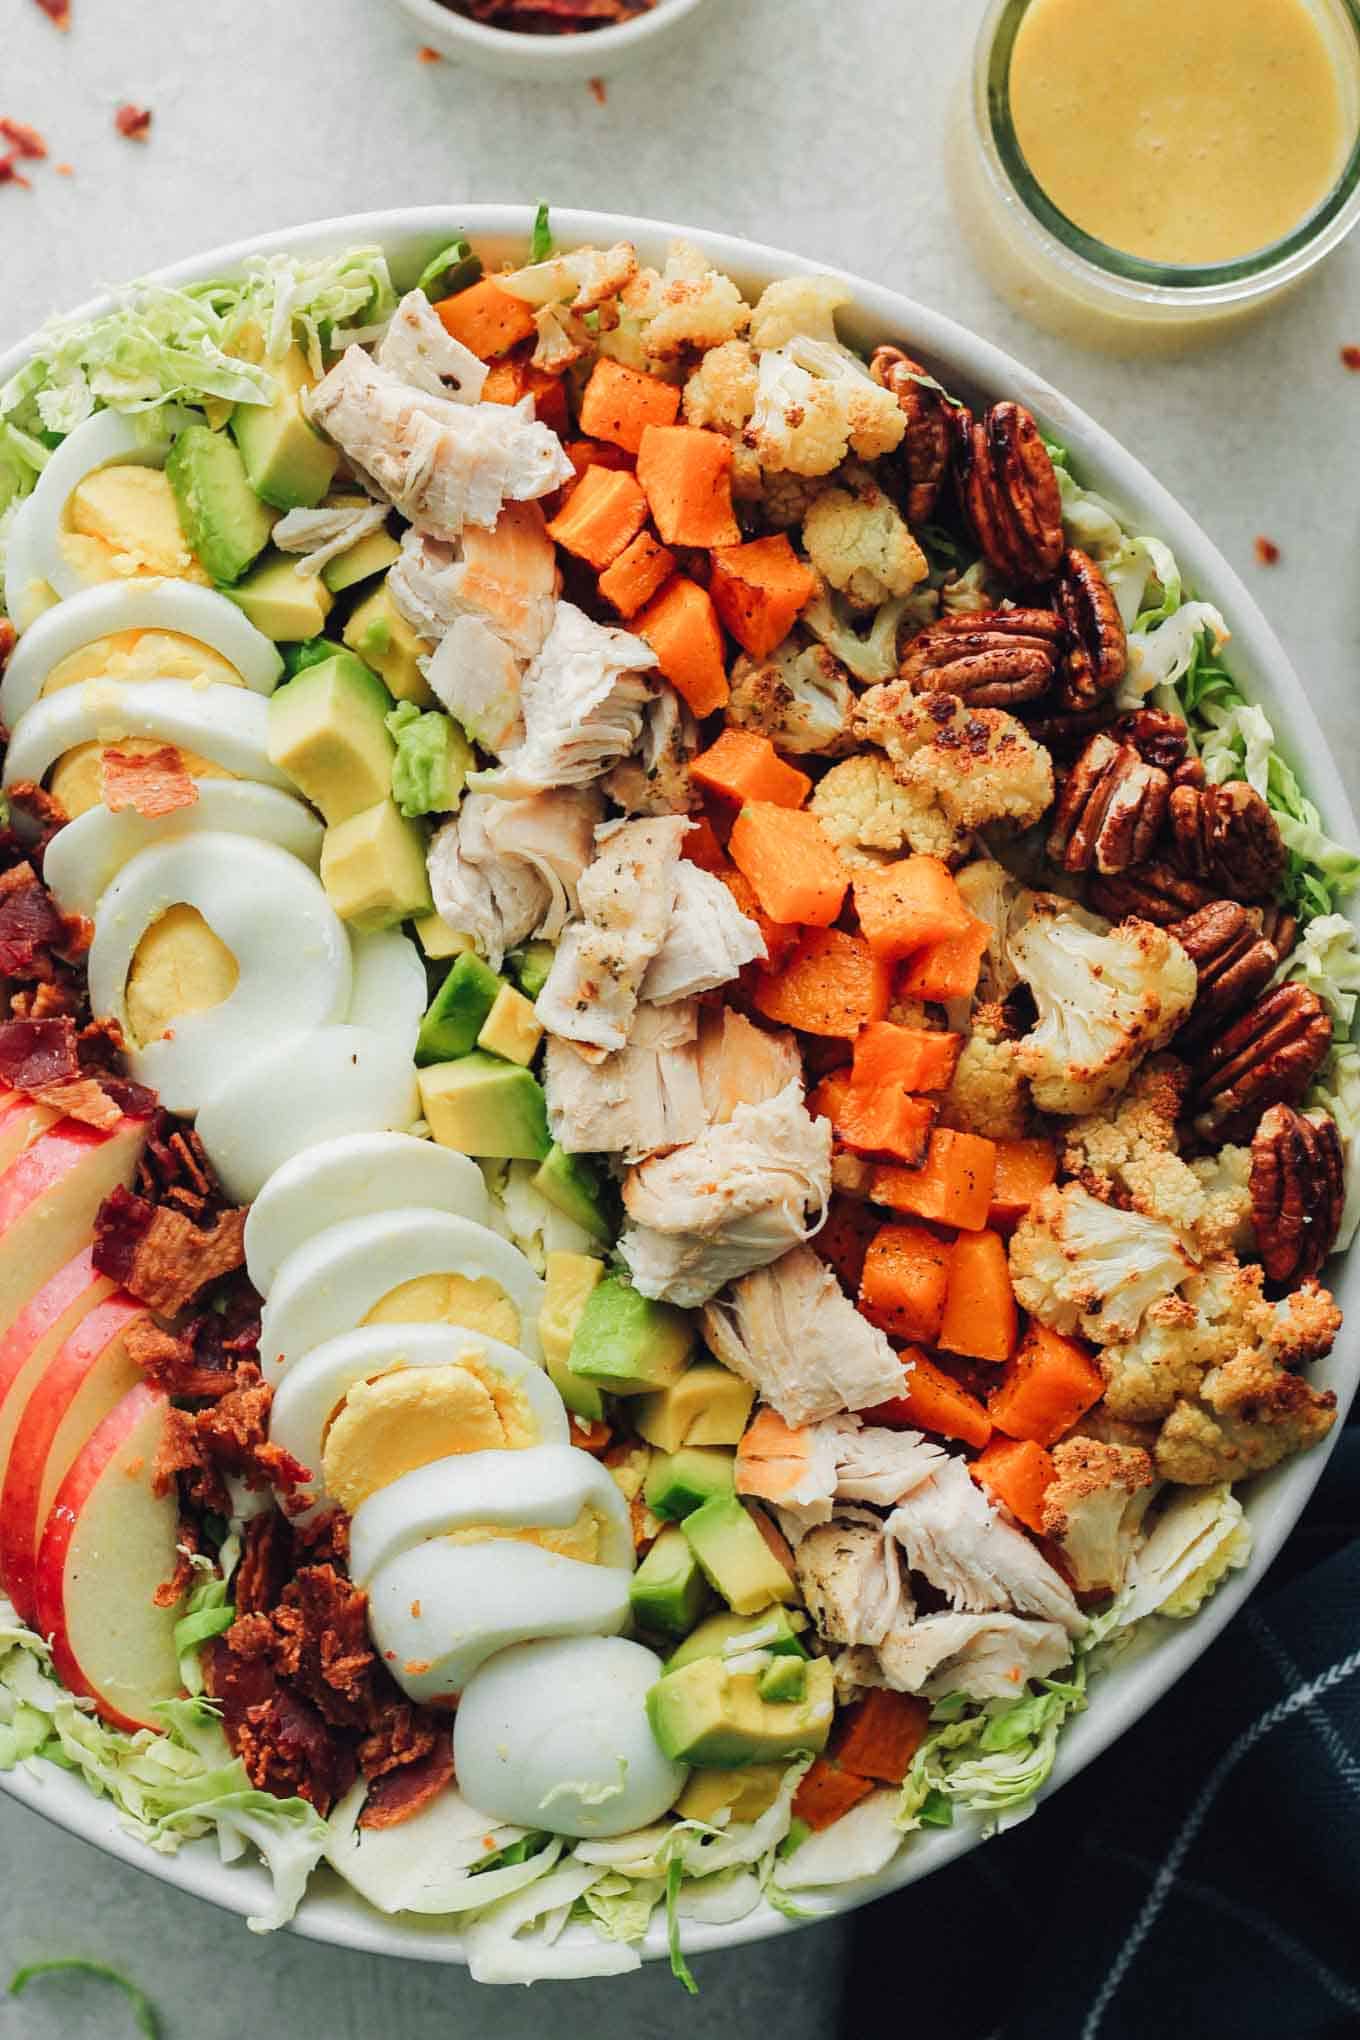 A zoomed in view of the finished Cobb salad in a bowl with the dressing, extra bacon bits, and pecans on the side.